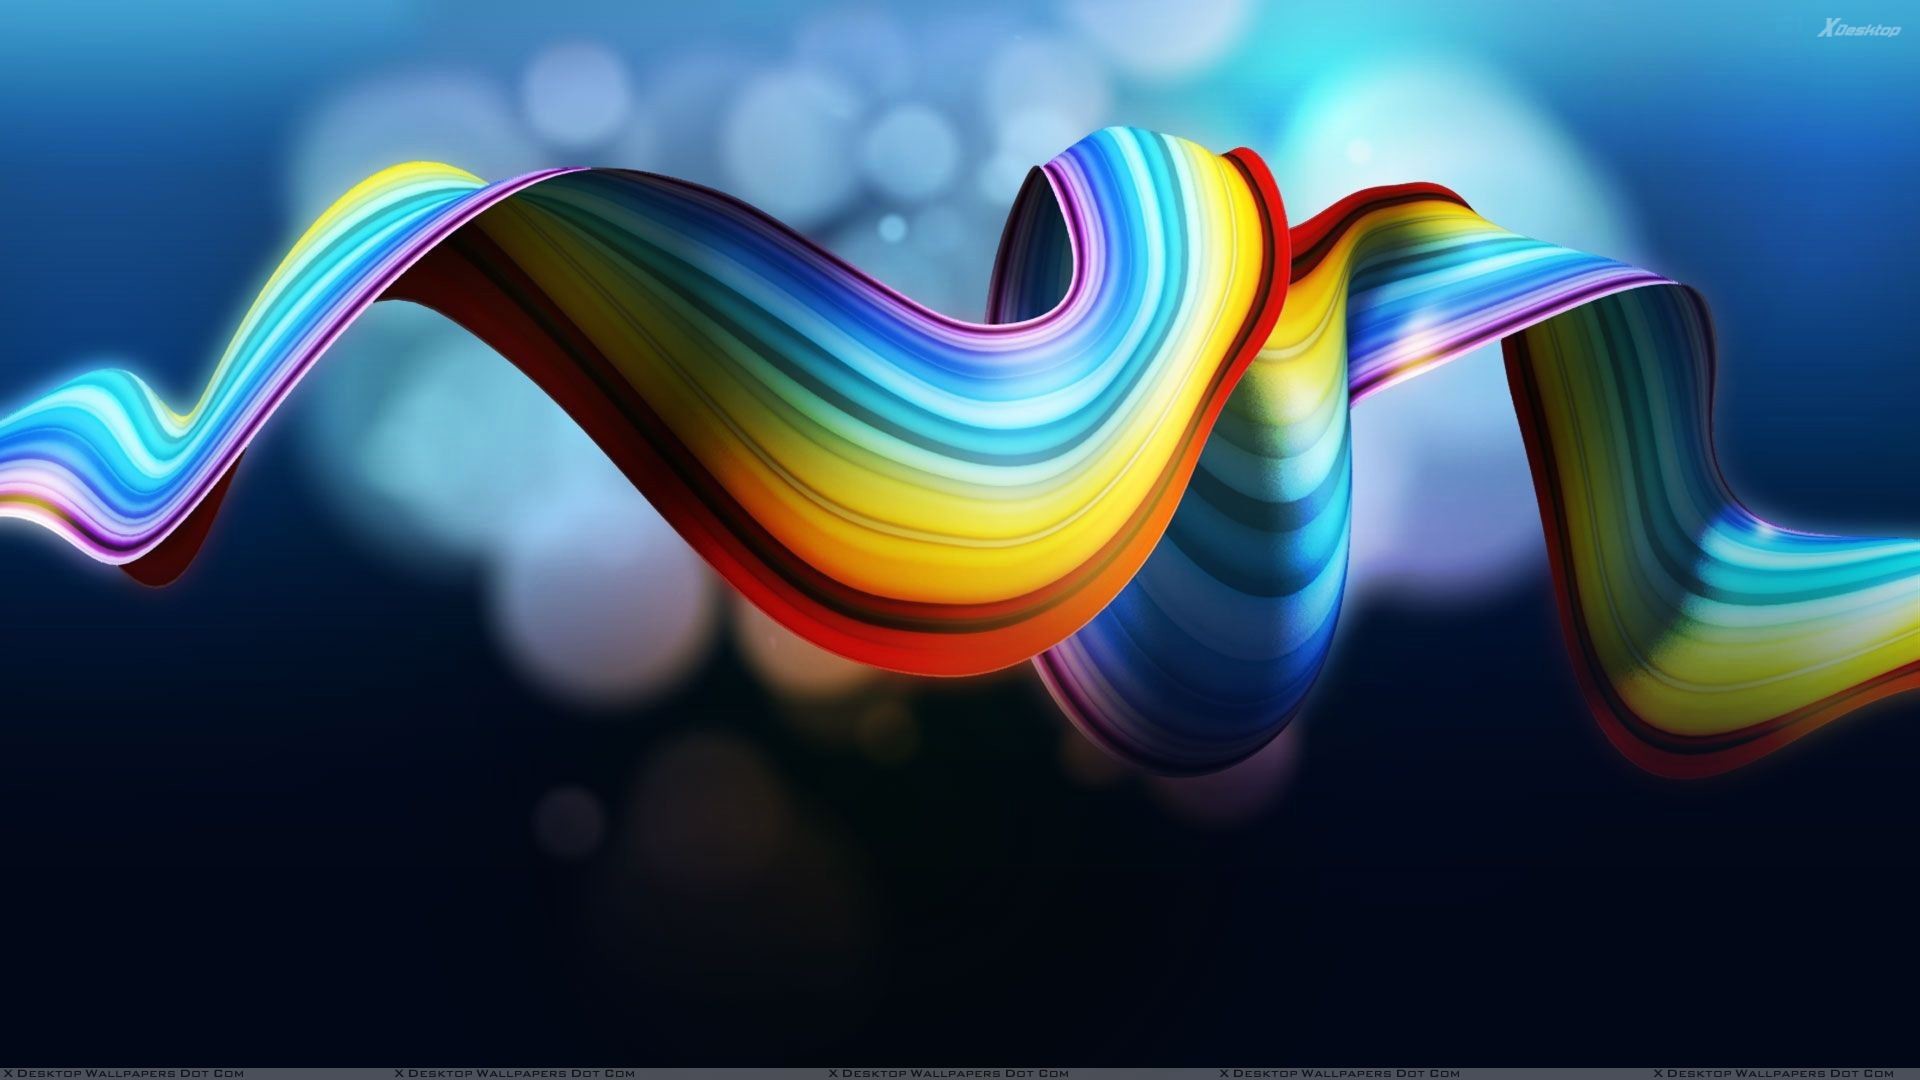 1920x1080 hd wallpaper rainbow abstract backgrounds is an HD wallpaper posted in  Abstract category. You can